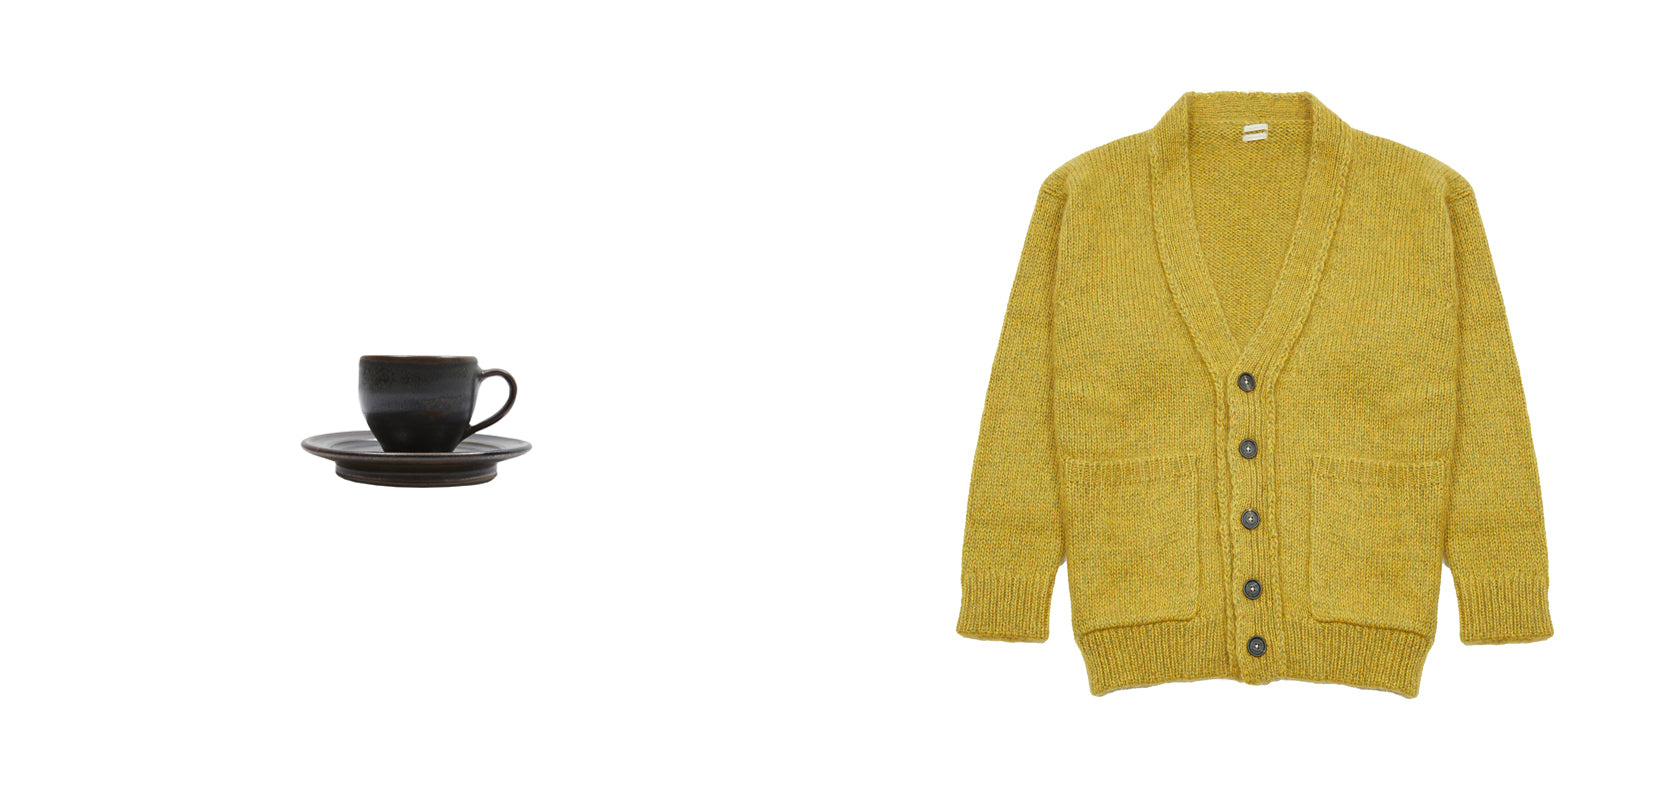 KWM Espresso Cup and Saucer and Massimo Alba Supercardigan